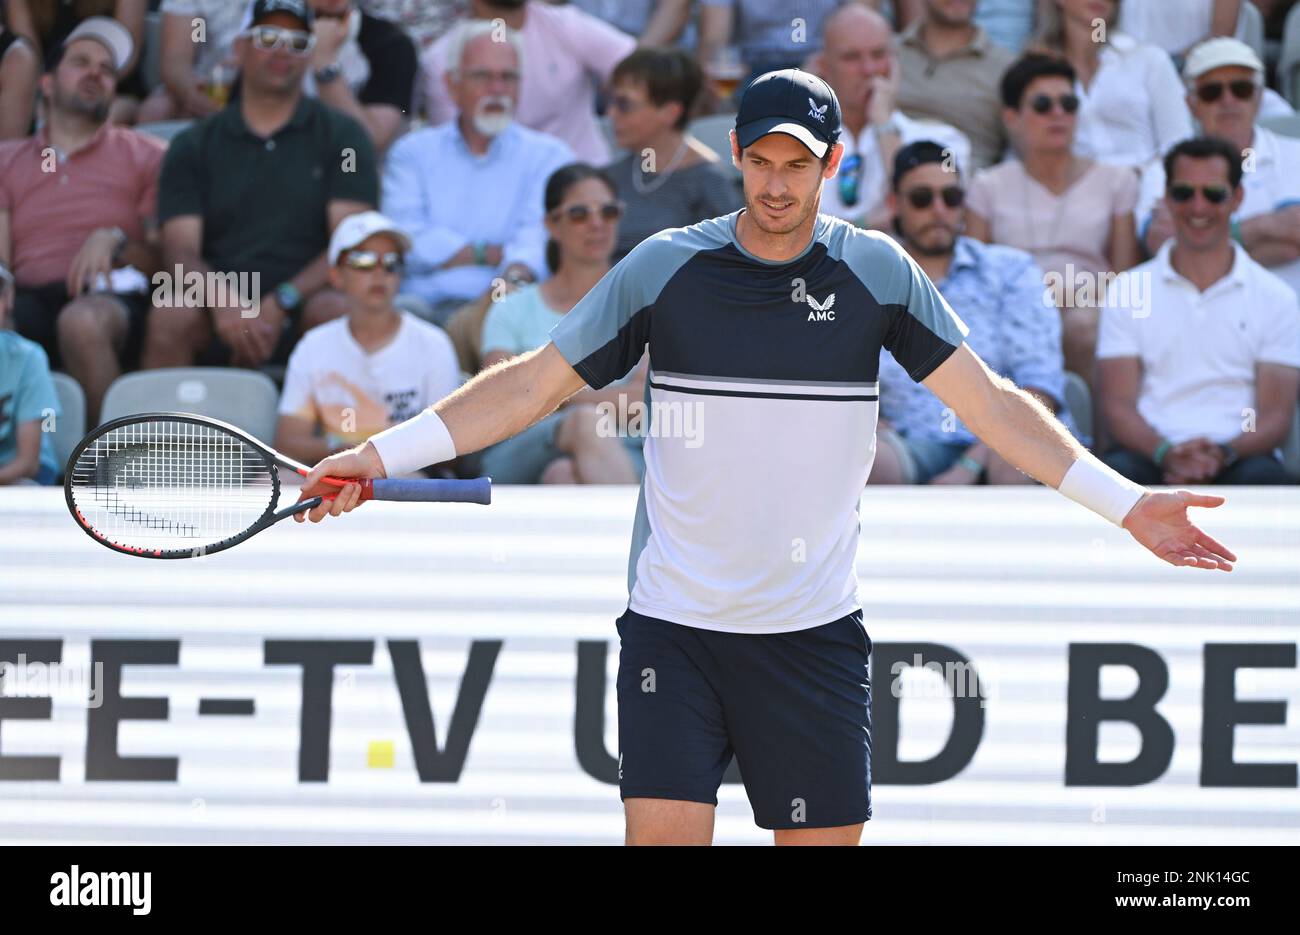 Britains Andy Murray loses a point to Italys Matteo Berrettini during the ATP tennis mens final match in Stuttgart, Germany, Sunday June 12, 2022